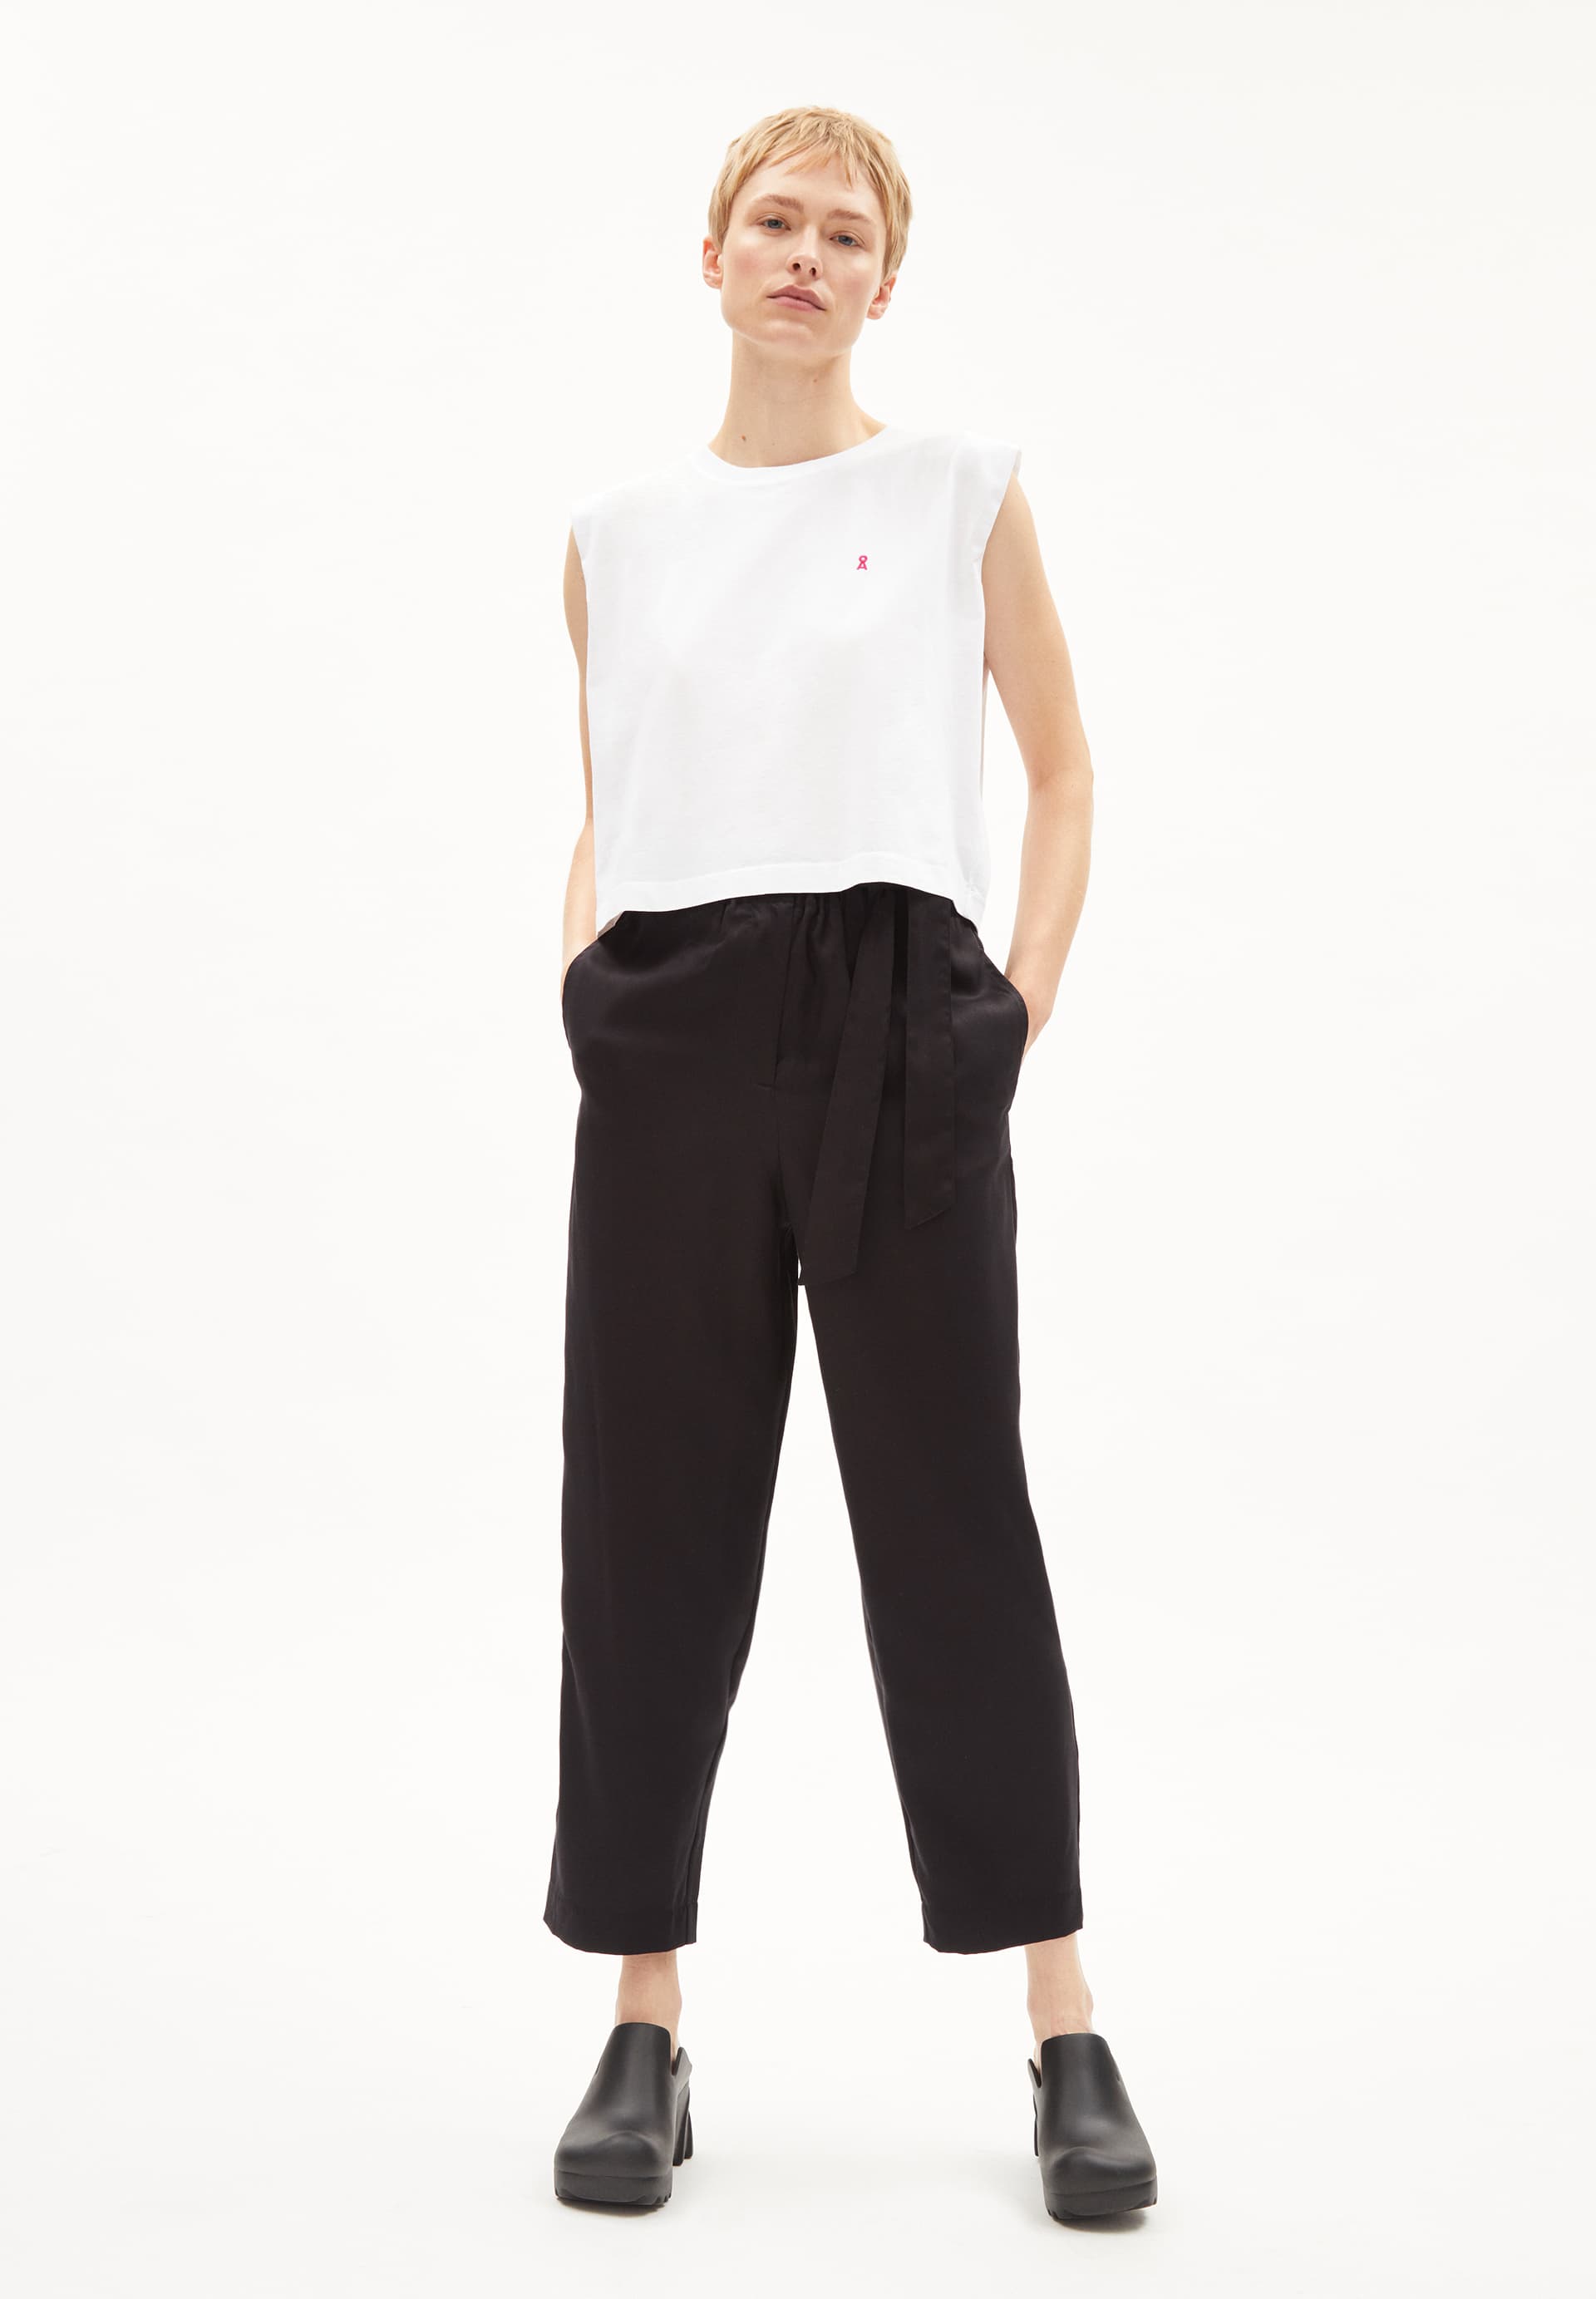 SAAMERA Pants Relaxed Fit made of TENCEL™ Lyocell